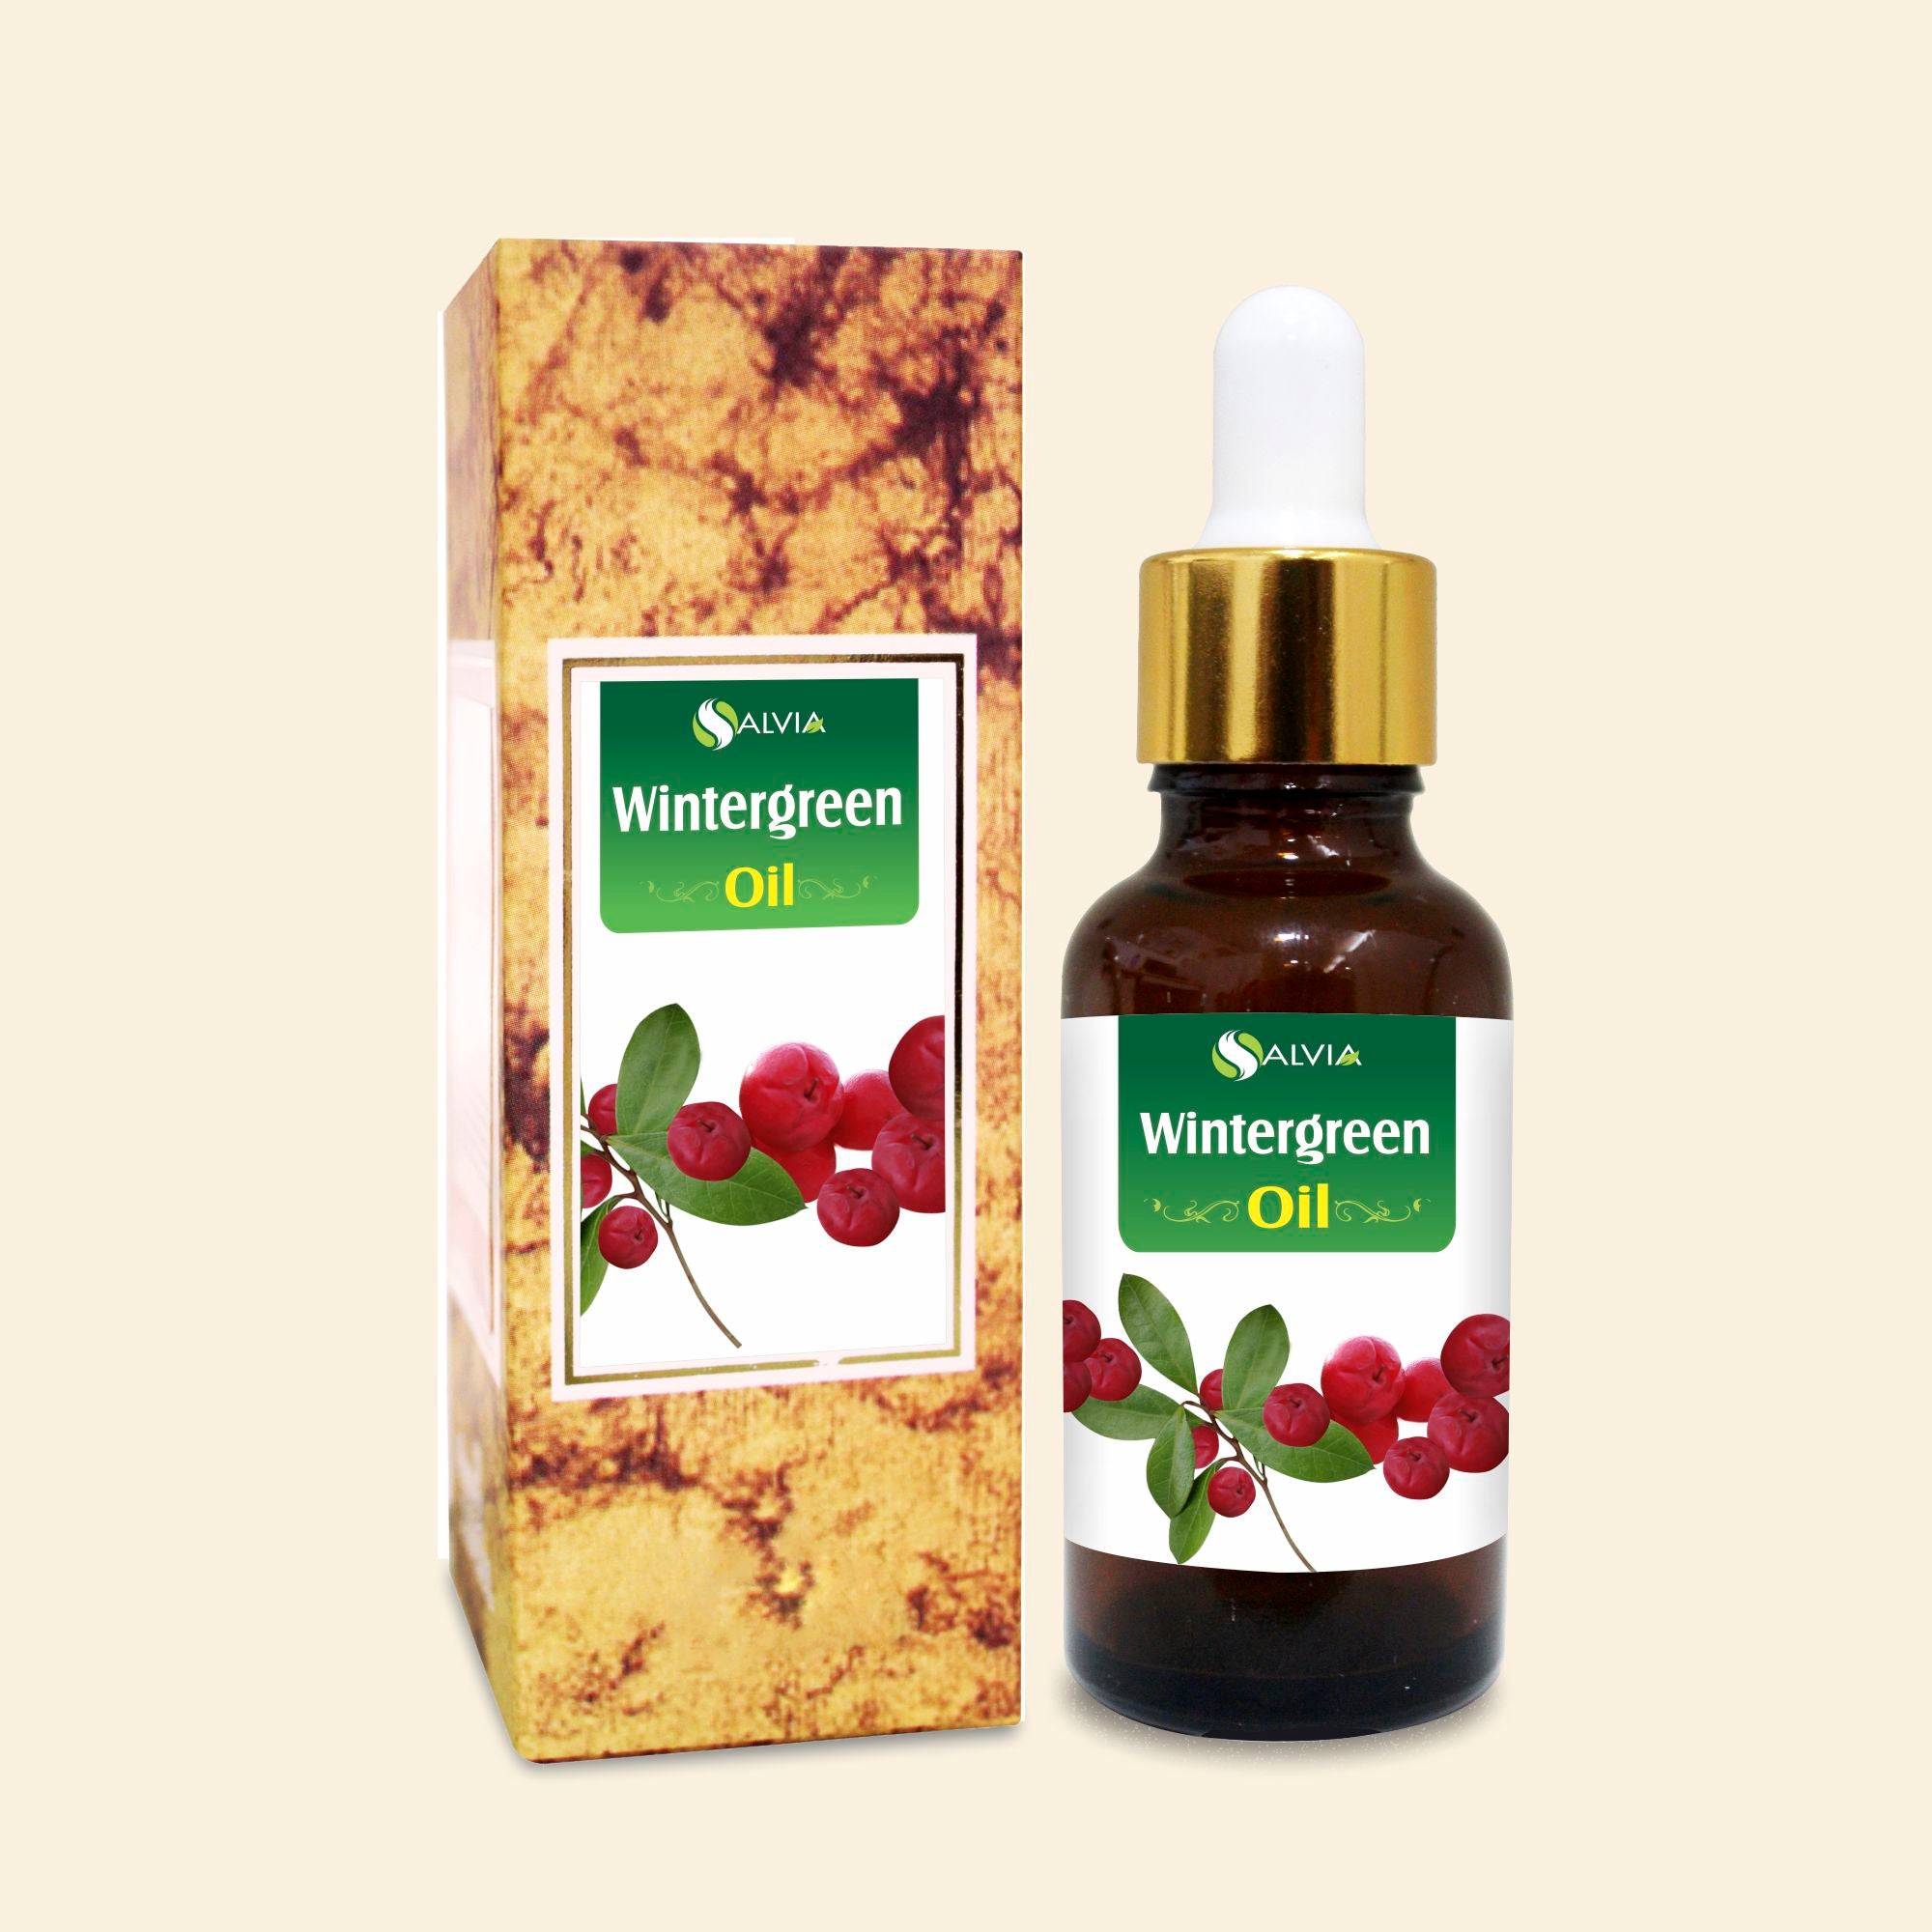 Salvia Natural Essential Oils Winter Green Oil (Gaultheria Procumbens) Pure Natural Essential Oil)